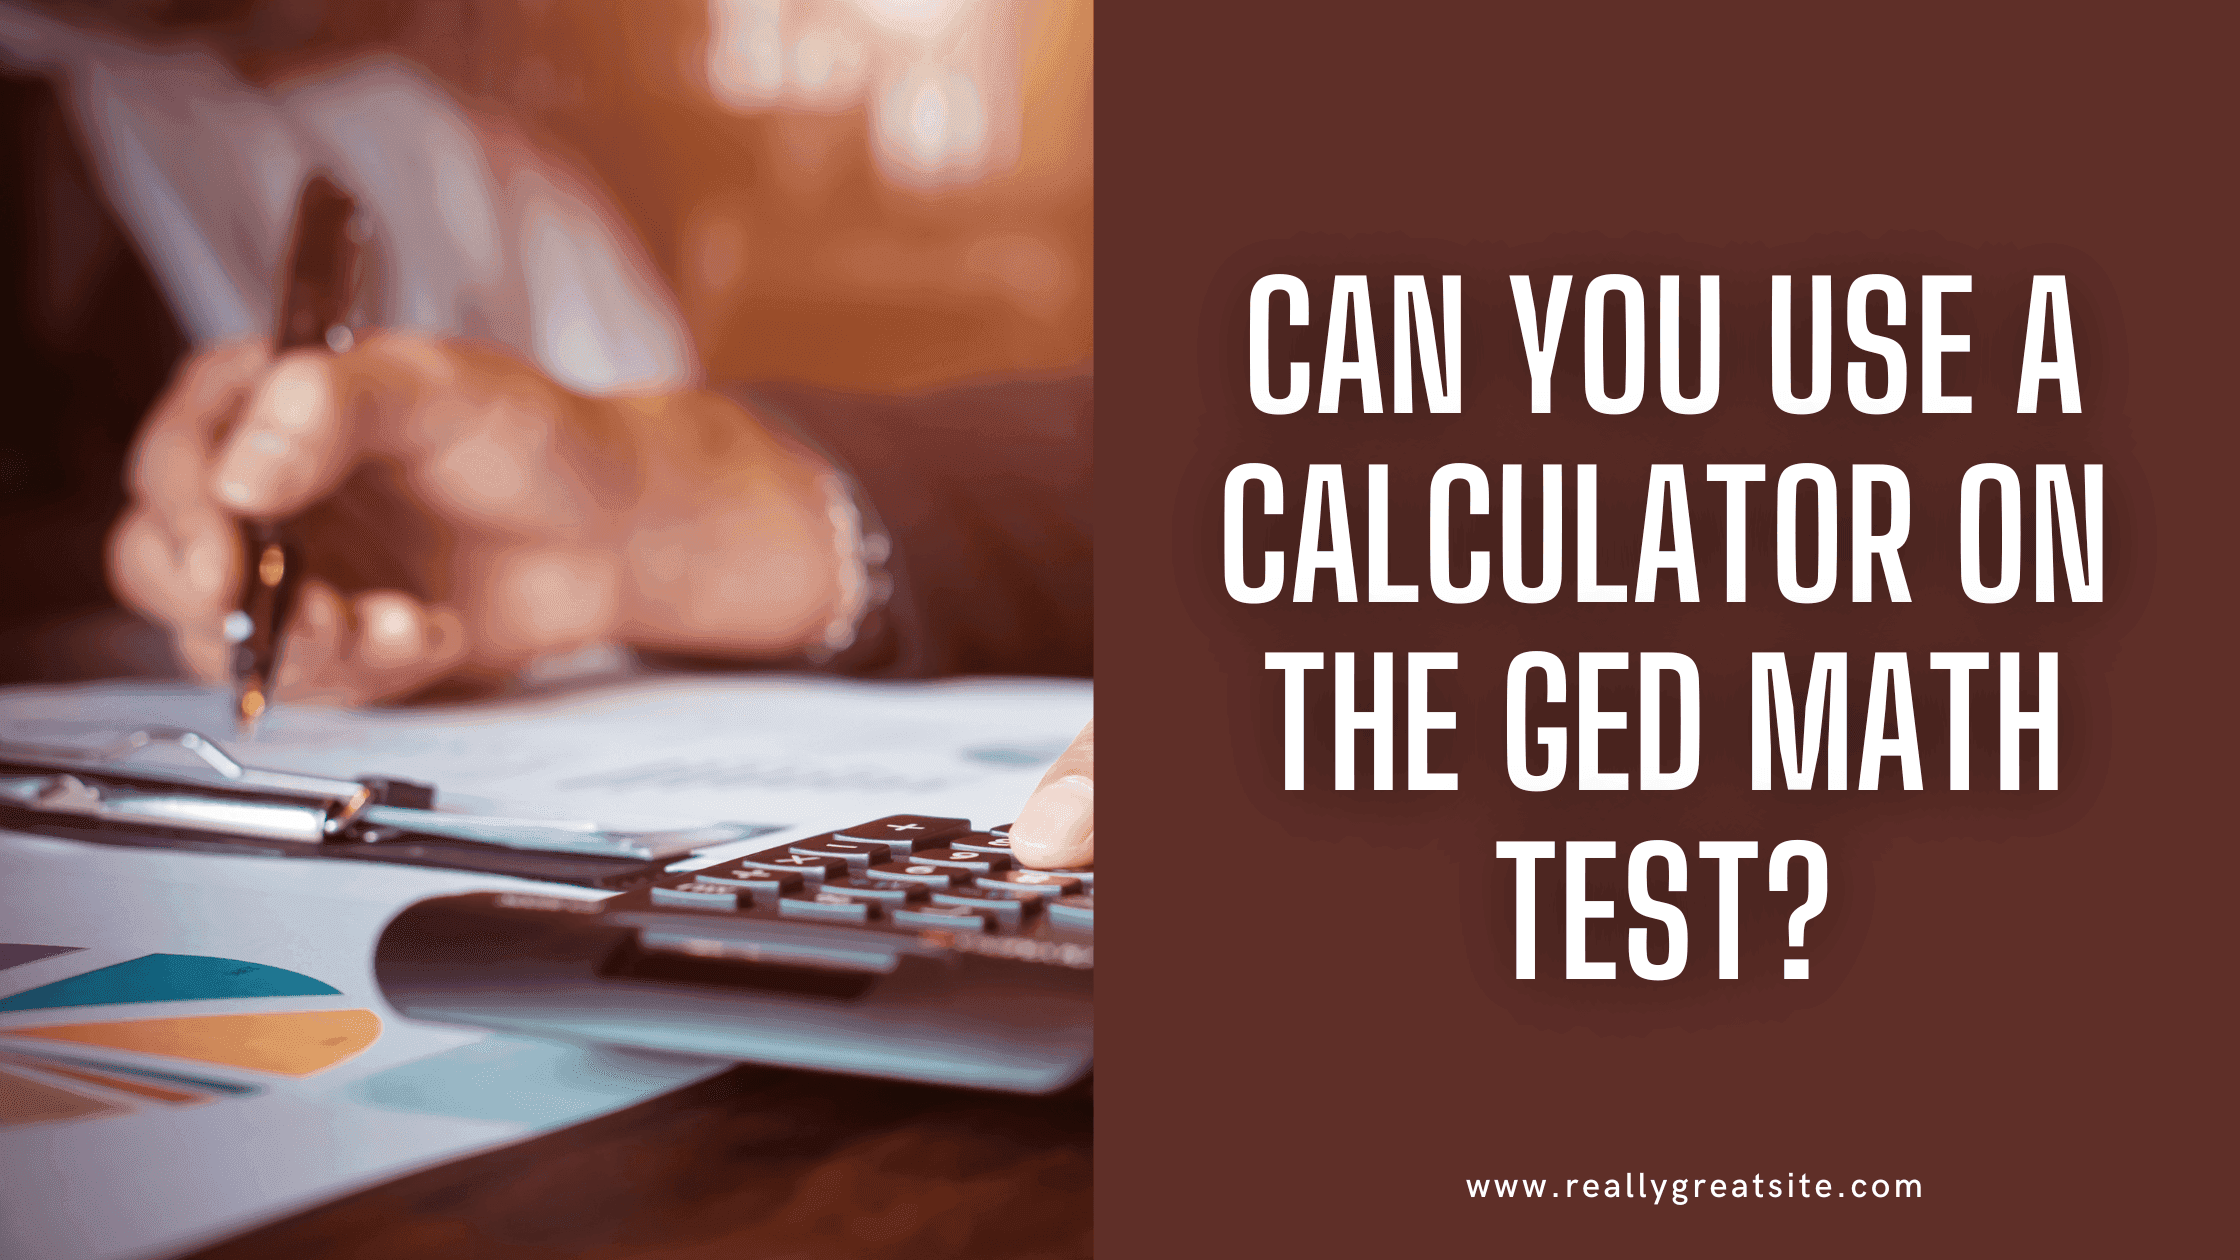 Can You Use a Calculator on the GED Math Test?